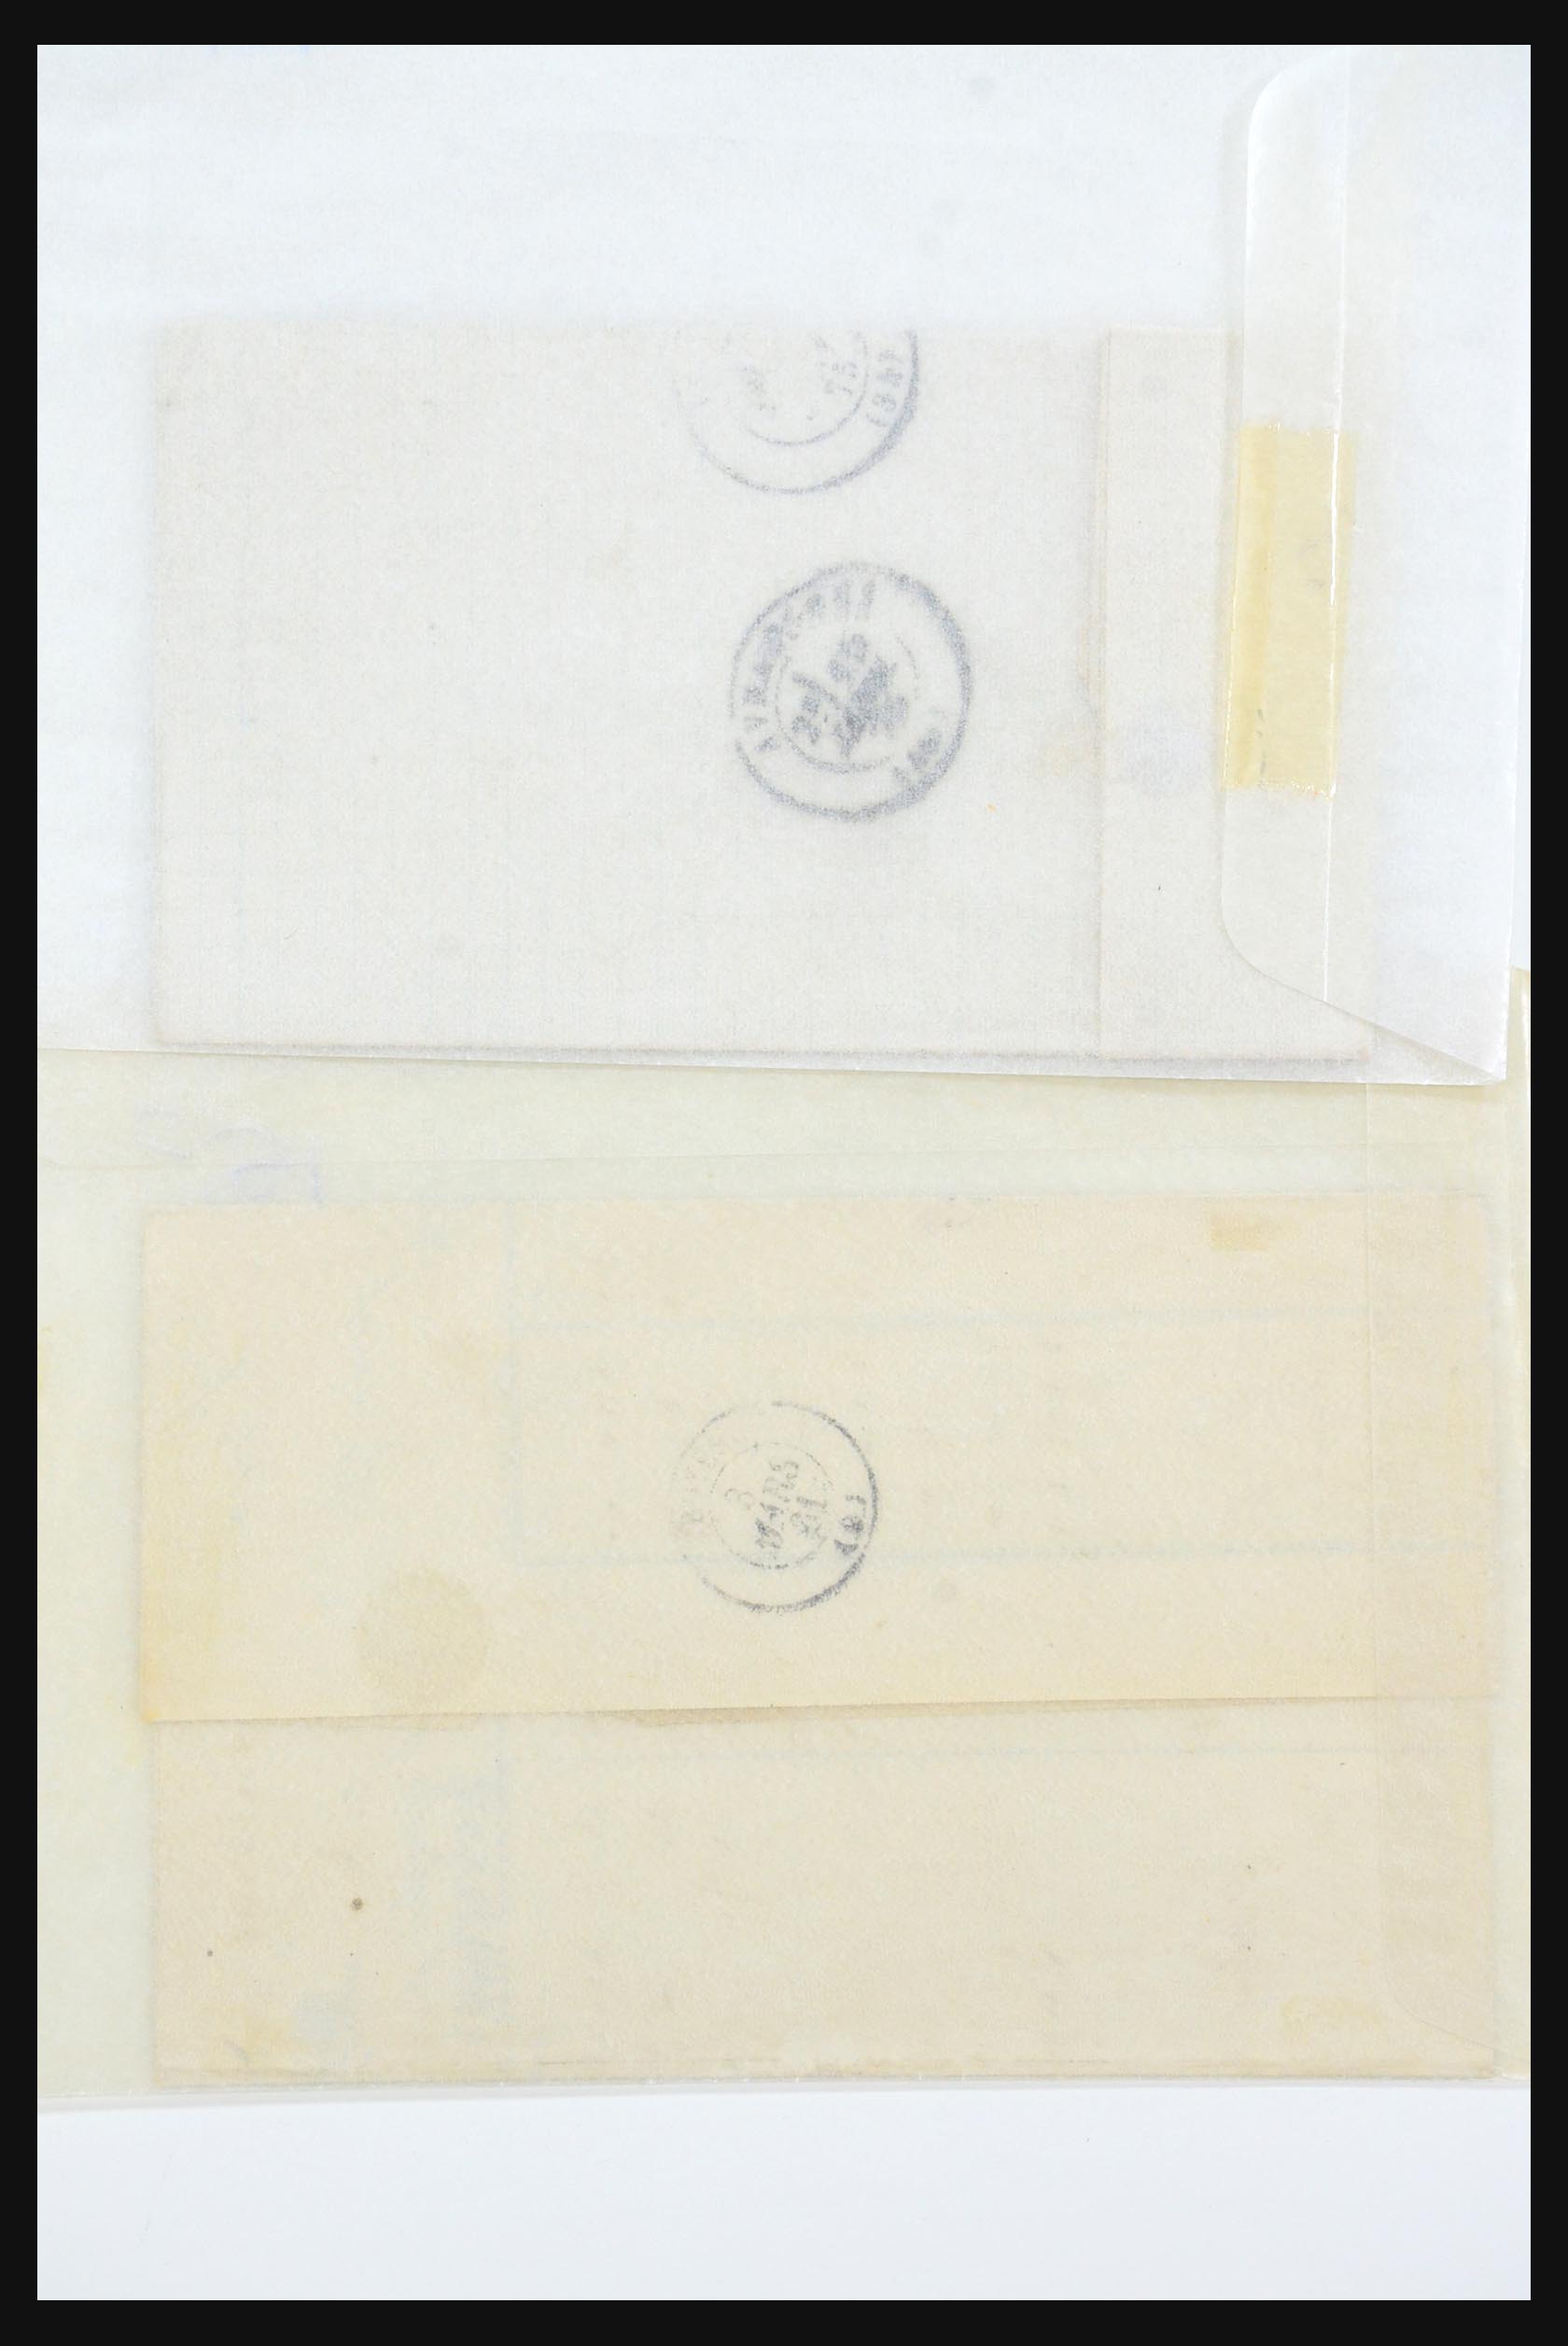 31359 0037 - 31359 France and Colonies covers 1770-1960.